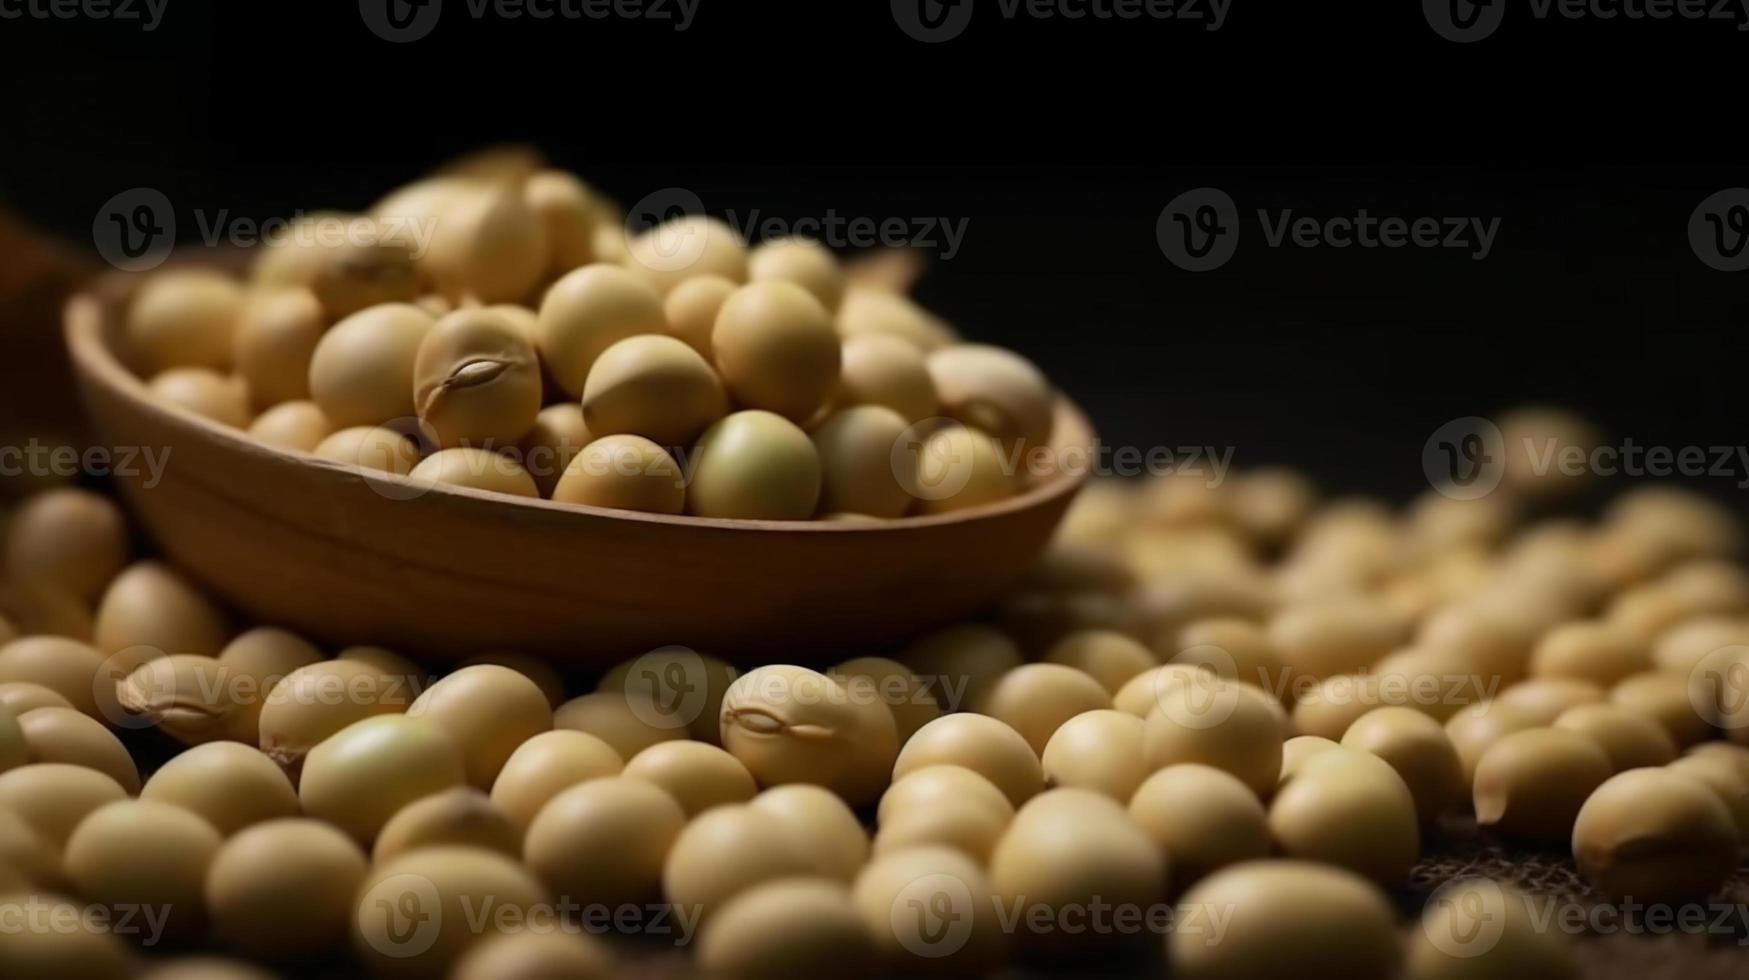 A wooden bowl of soya beans or soybean wooden background studio presentation. photo